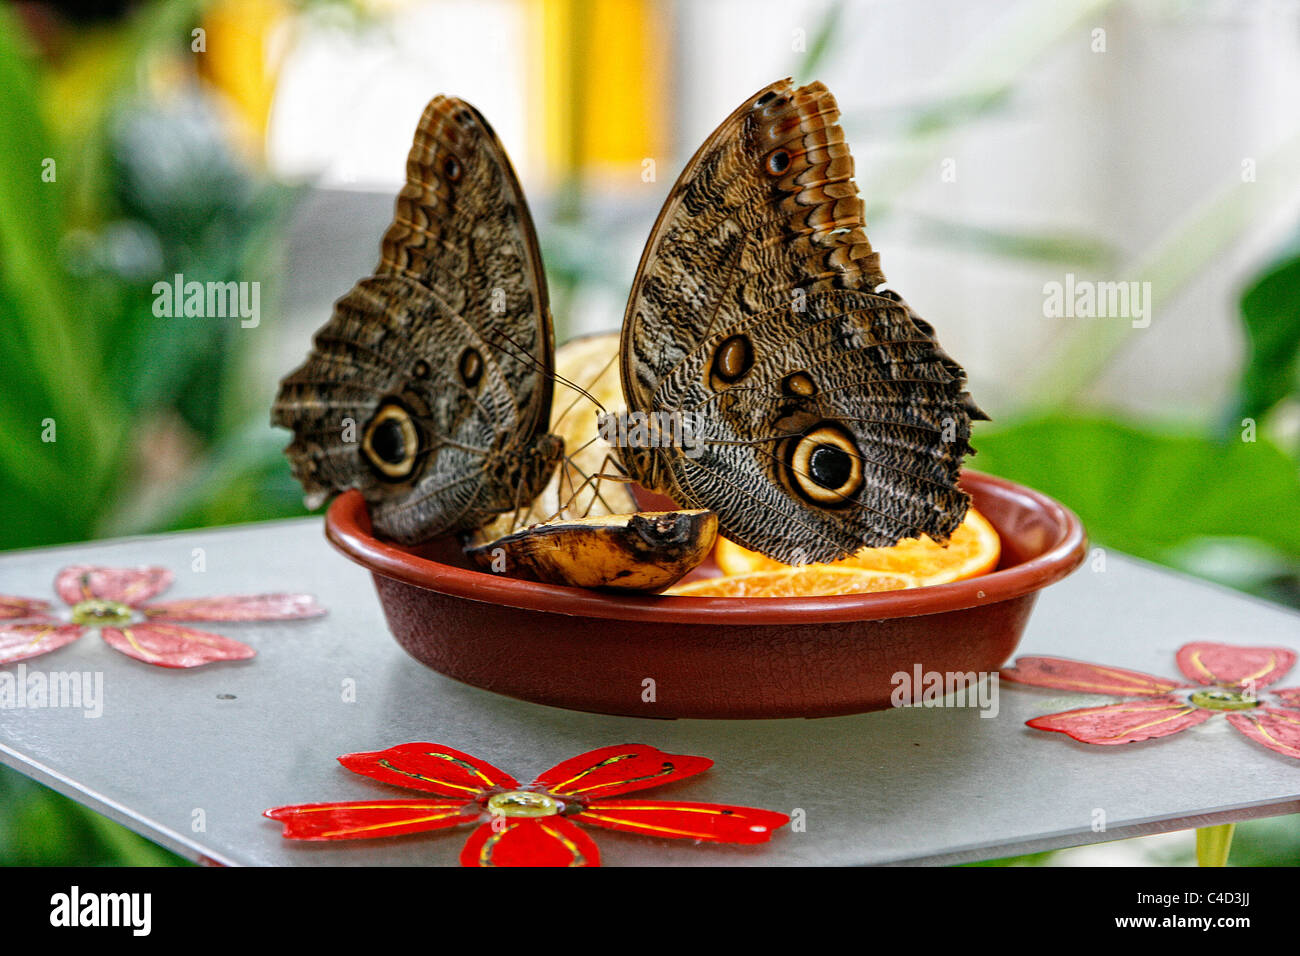 A couple of Forest Giant Owl butterflies (Caligo eurilochus) feeding on a plate with fruits. Butterfly house, Leipzig, Germany. Stock Photo